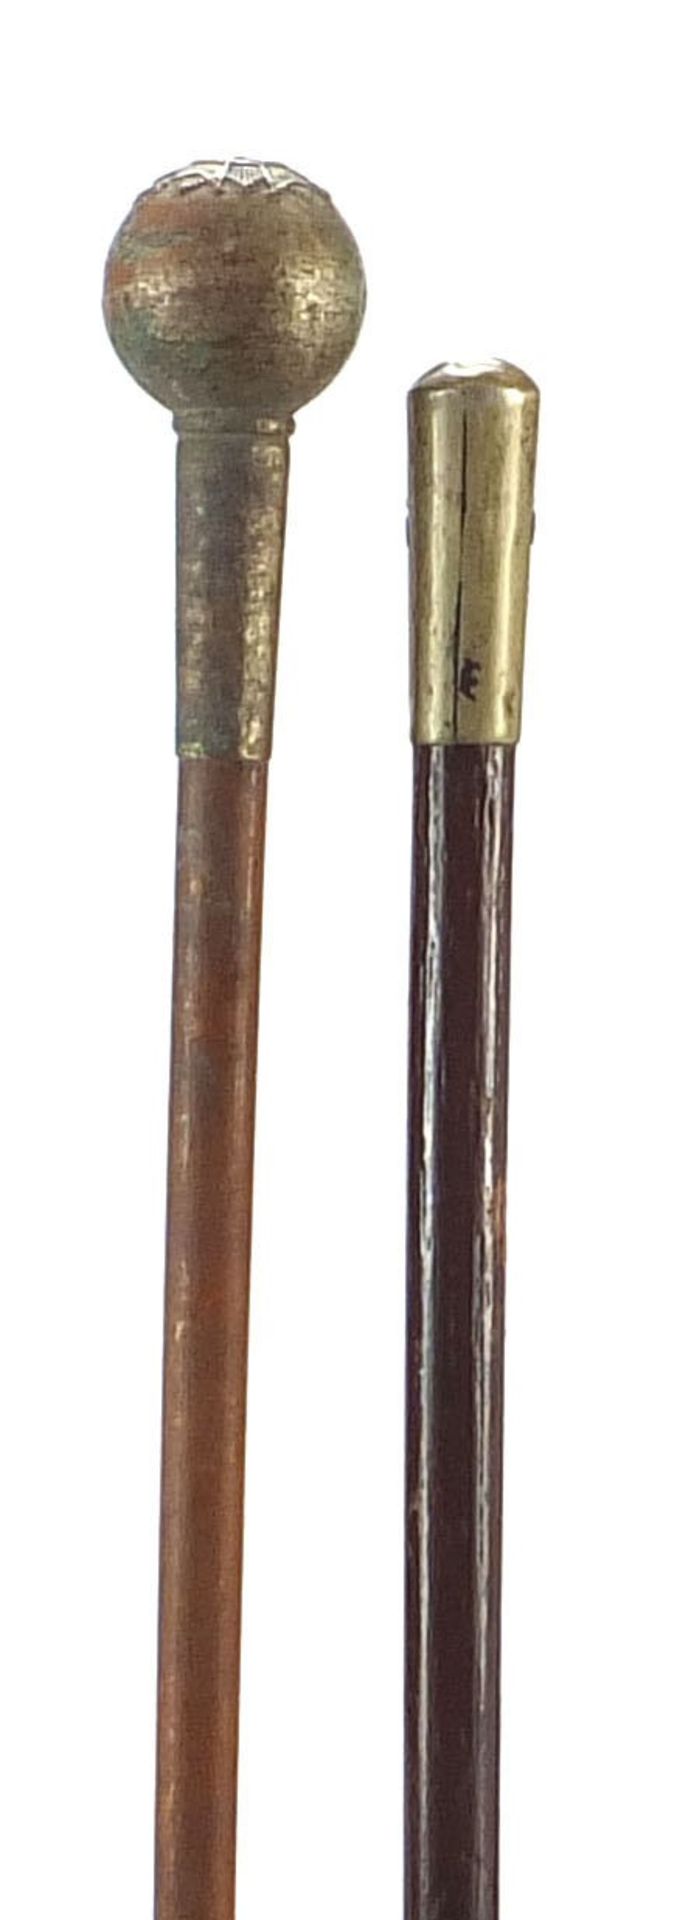 Two mililtary interest swagger sticks including Bedfordshire & Hertfordshire Regiment, 71cm in - Image 4 of 6